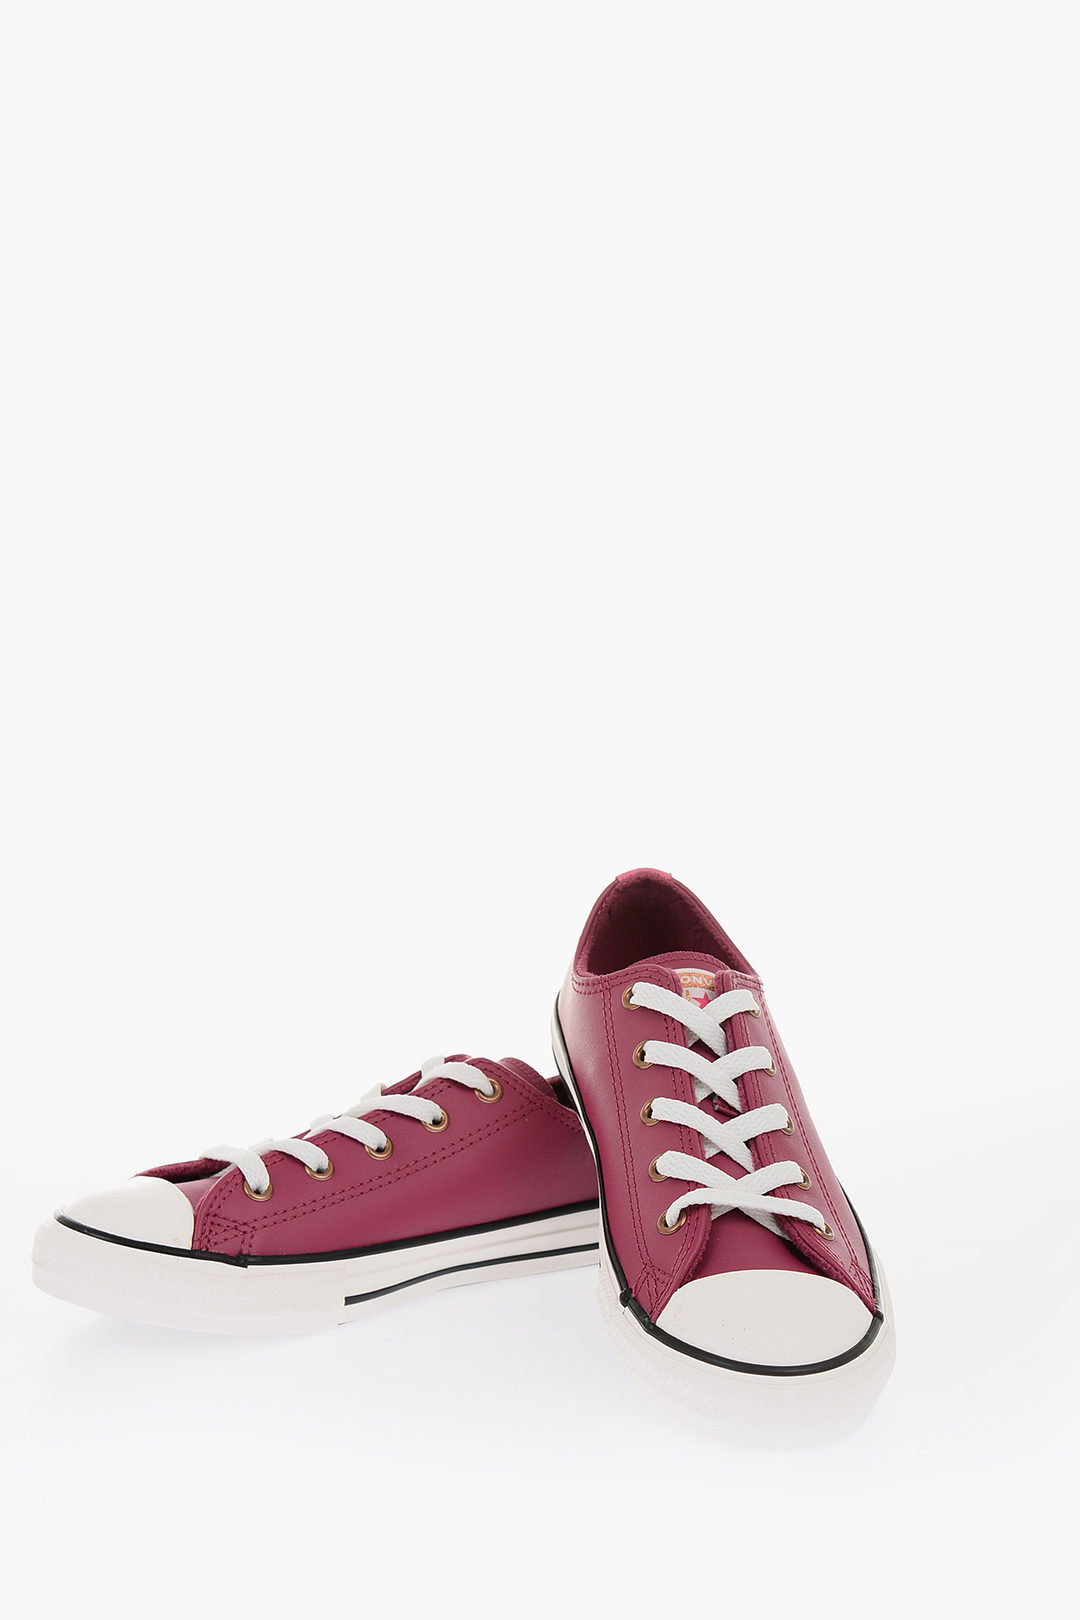 Converse KIDS ALL STAR leather Sneakers girls - Glamood Outlet